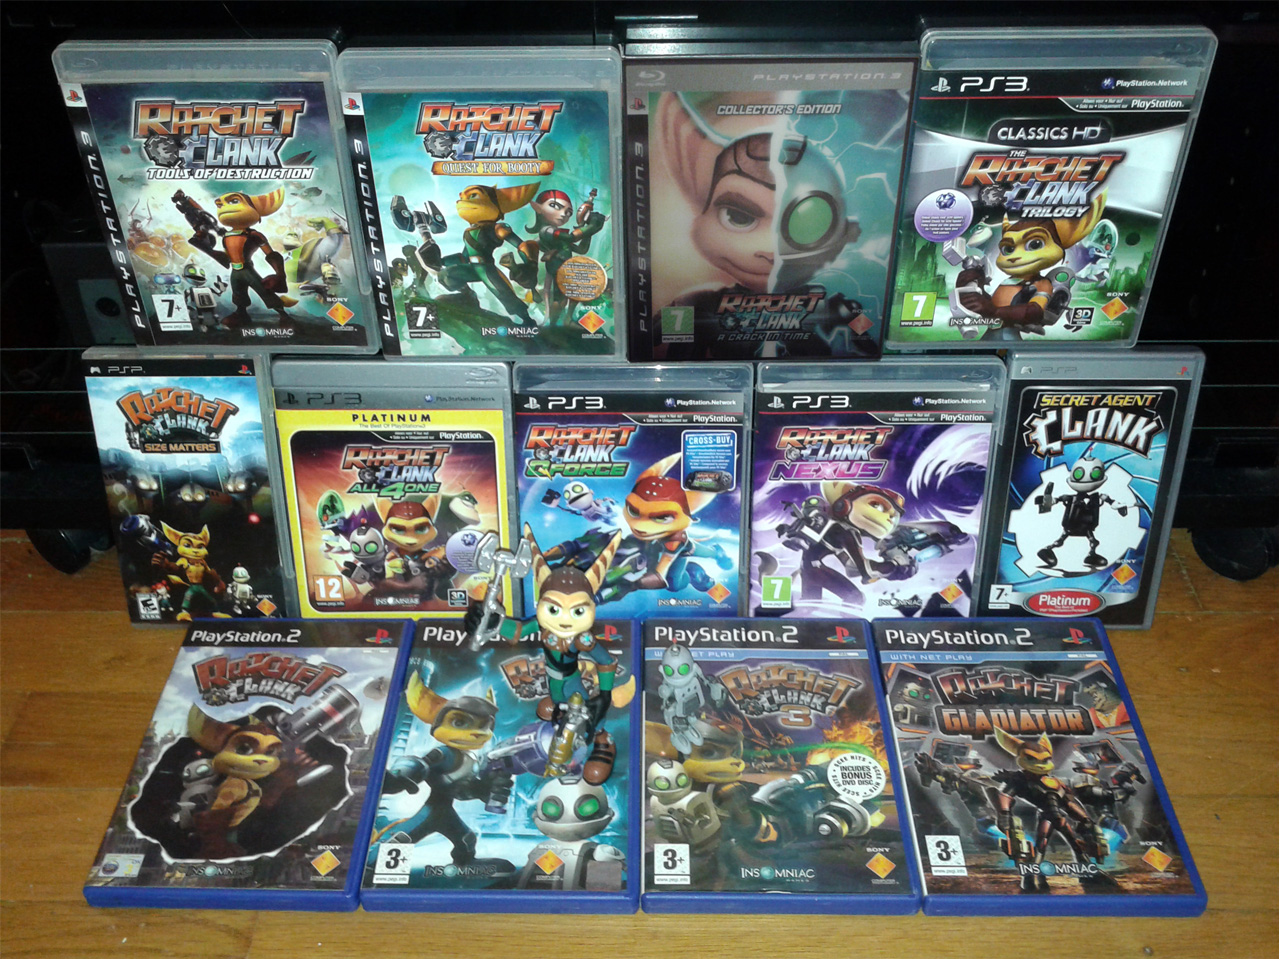 Ratchet and Clank Collection for PS4/5 Mock-Up by carsolini10 on